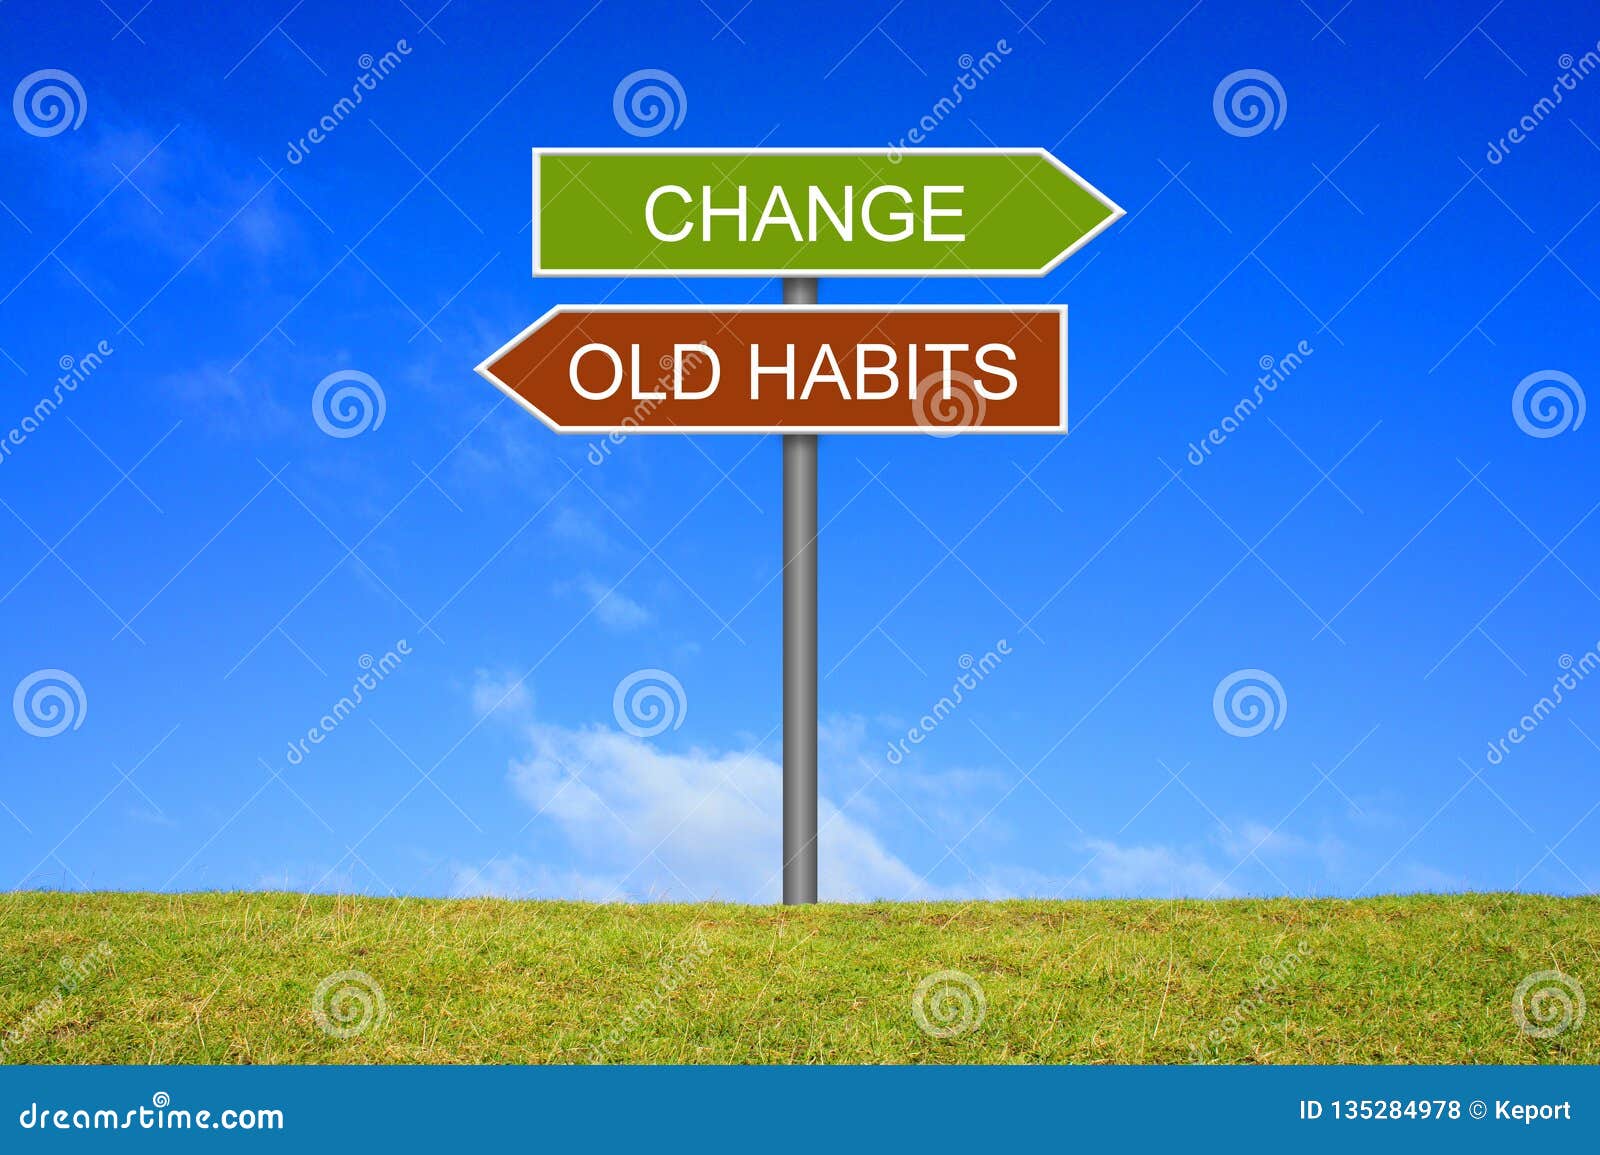 signpost showing old habits and change